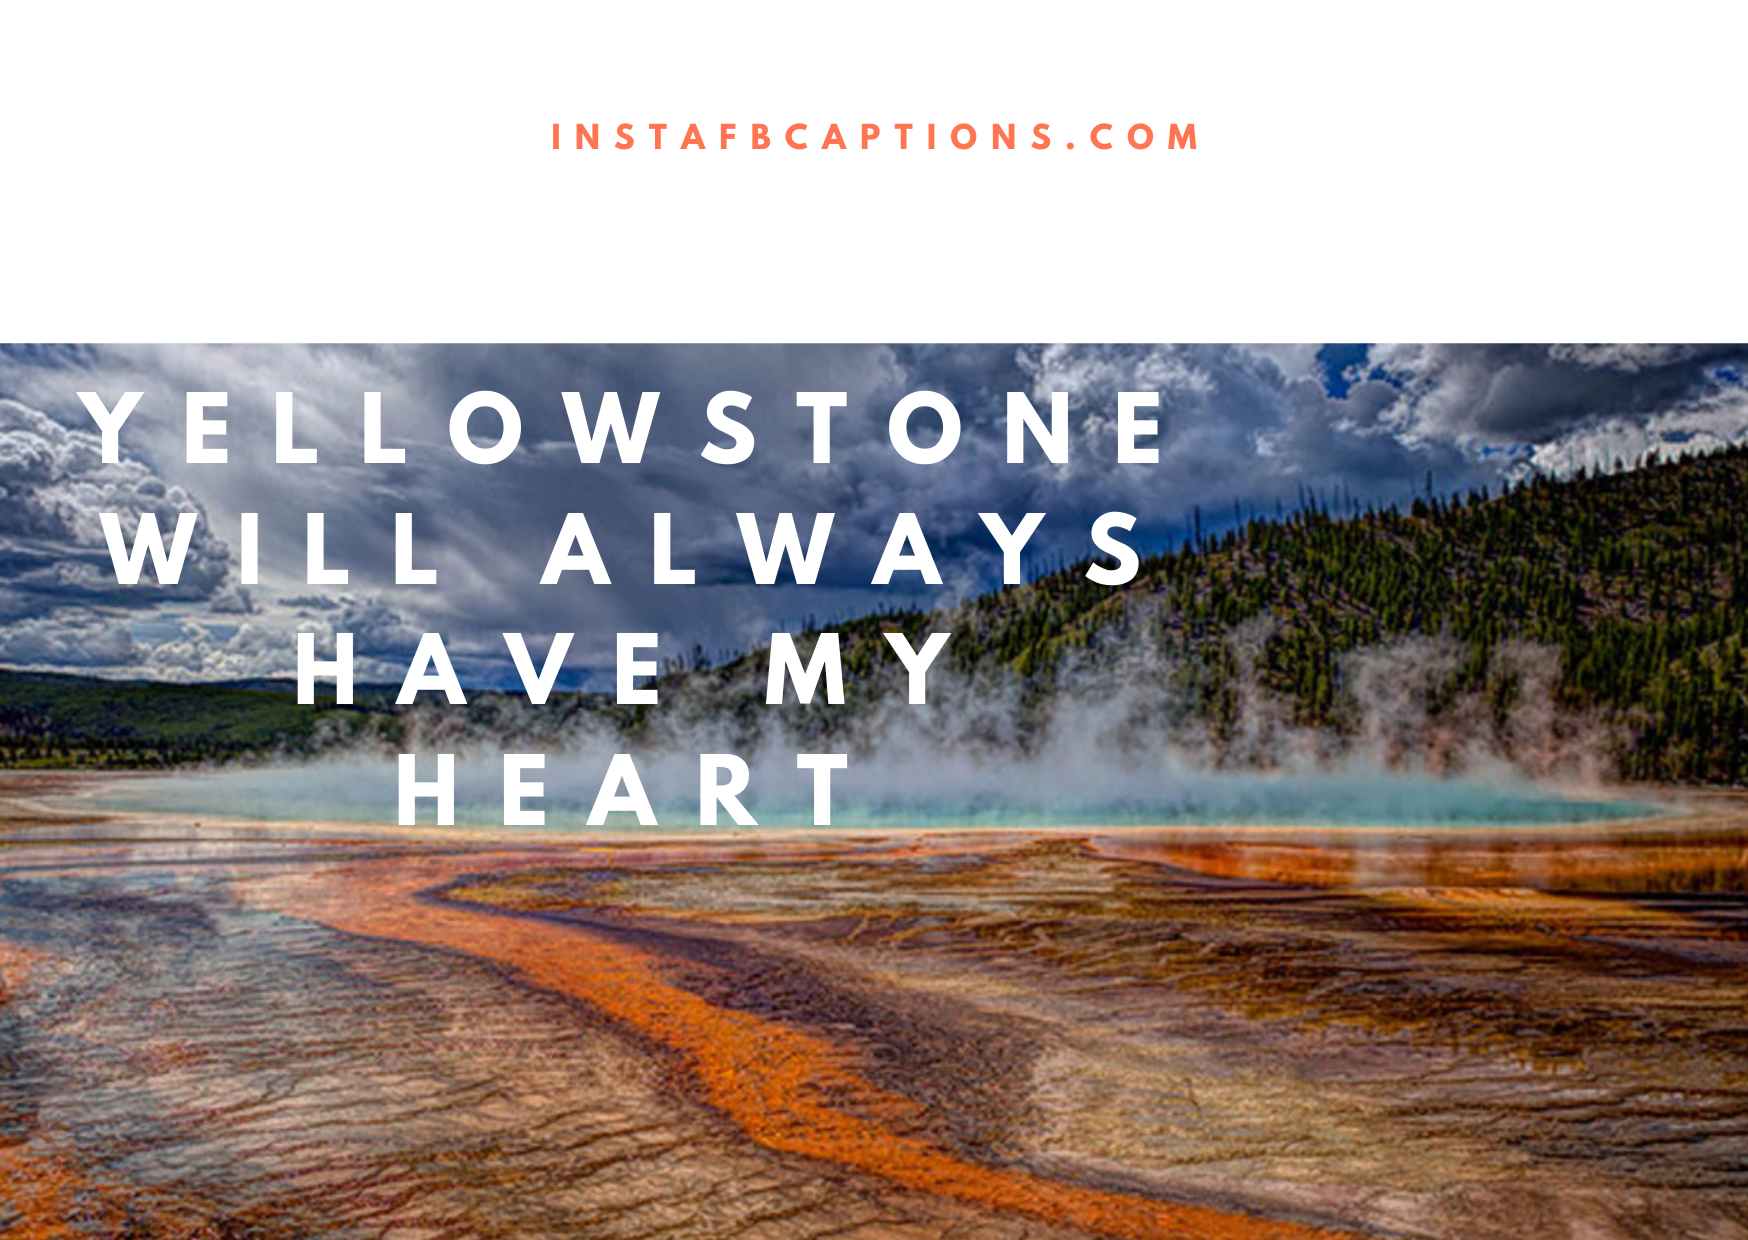 Inspirational Yellowstone Captions  - Inspirational Yellowstone Captions - [New] Yellowstone Captions Quotes for Instagram in 2023